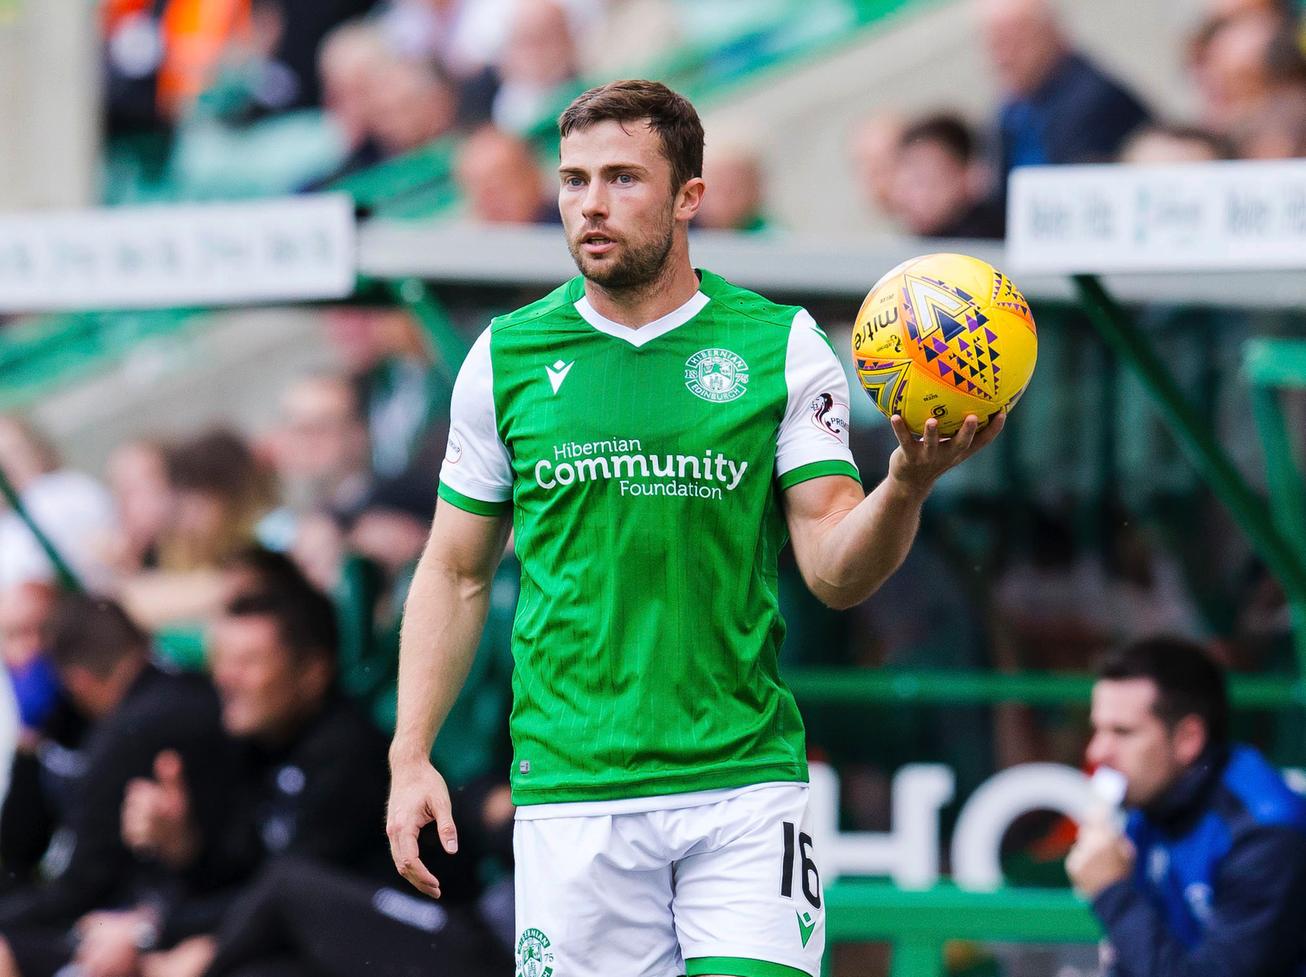 A real solid shift from the veteran left-back. He got forward well to support and also kept the reigning PFA Scotland Player of the Year, James Forrest, completely quiet. 8